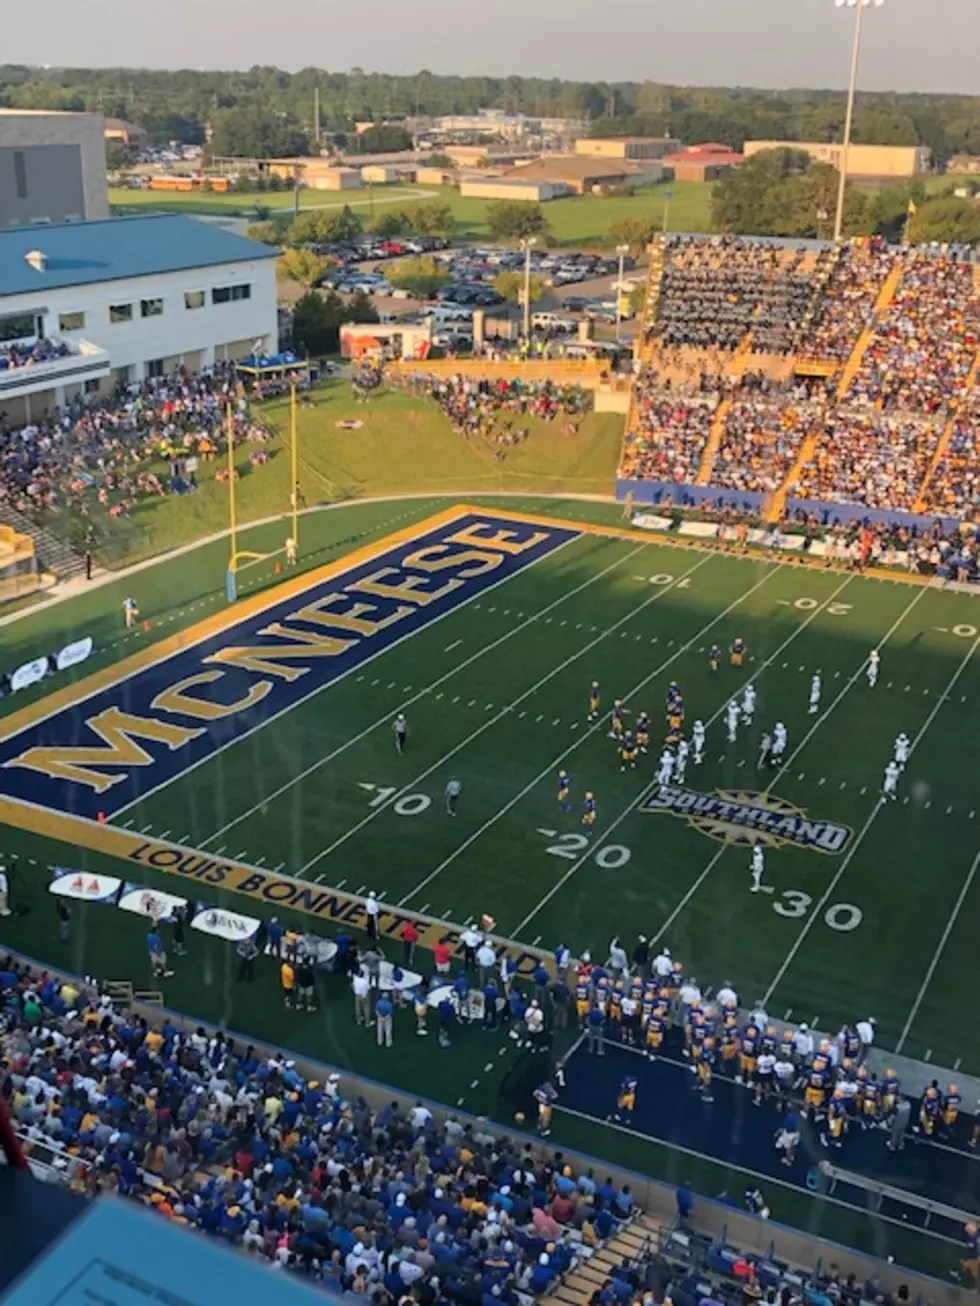 Mcneese Takes On Houston Baptist University For Homecoming This Weekend